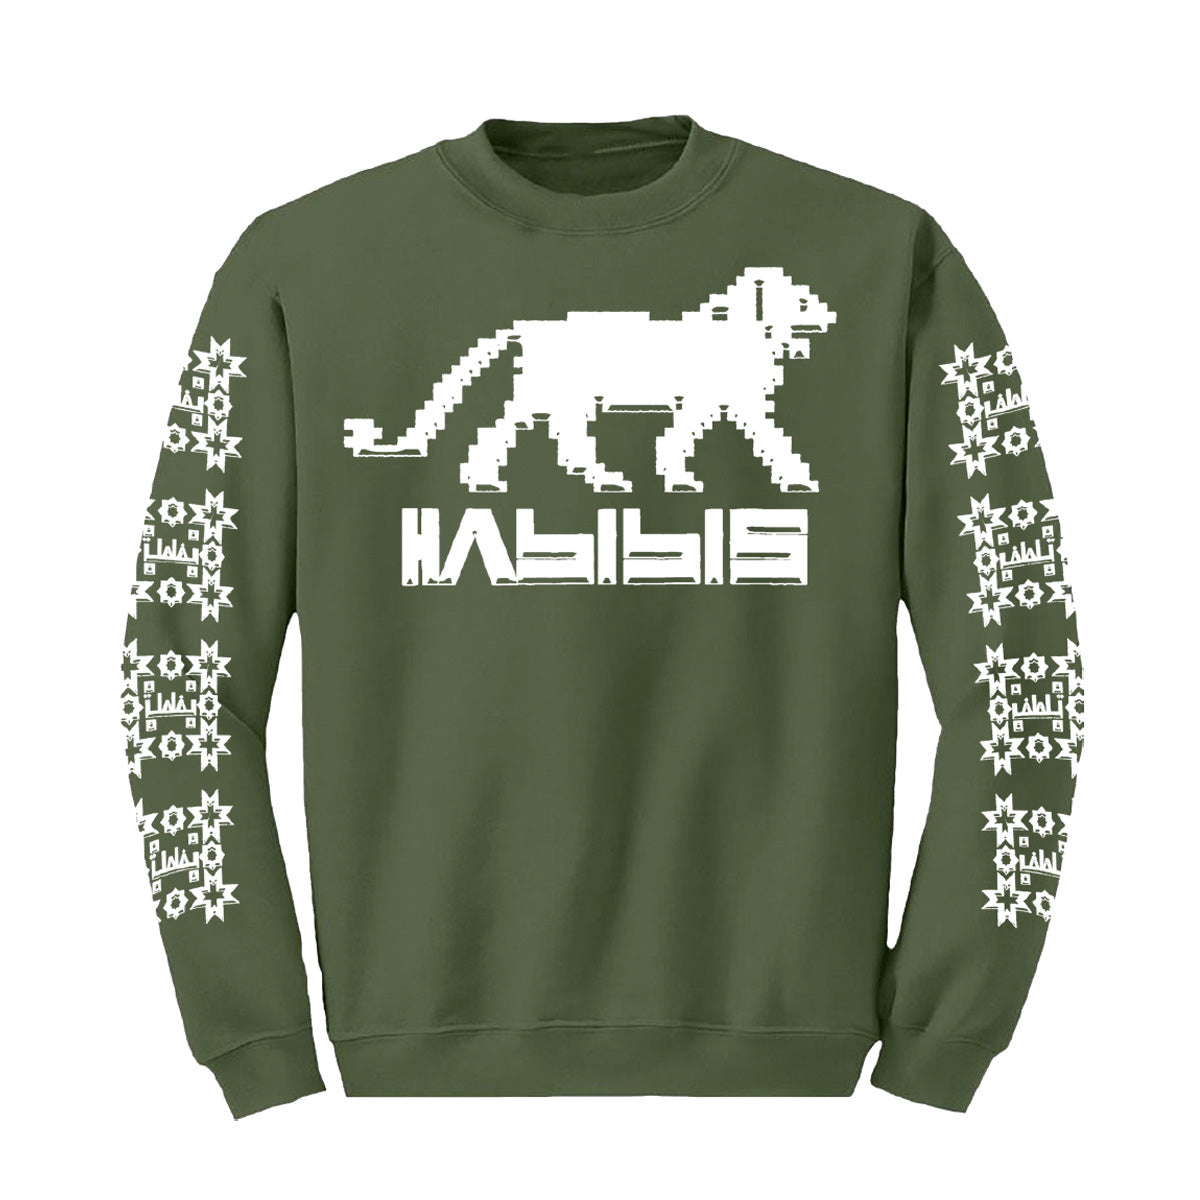 Olive green Habibis Crewneck sweatshirt with white lion graphic logo on chest and sleeves. Free uk shipping over £50